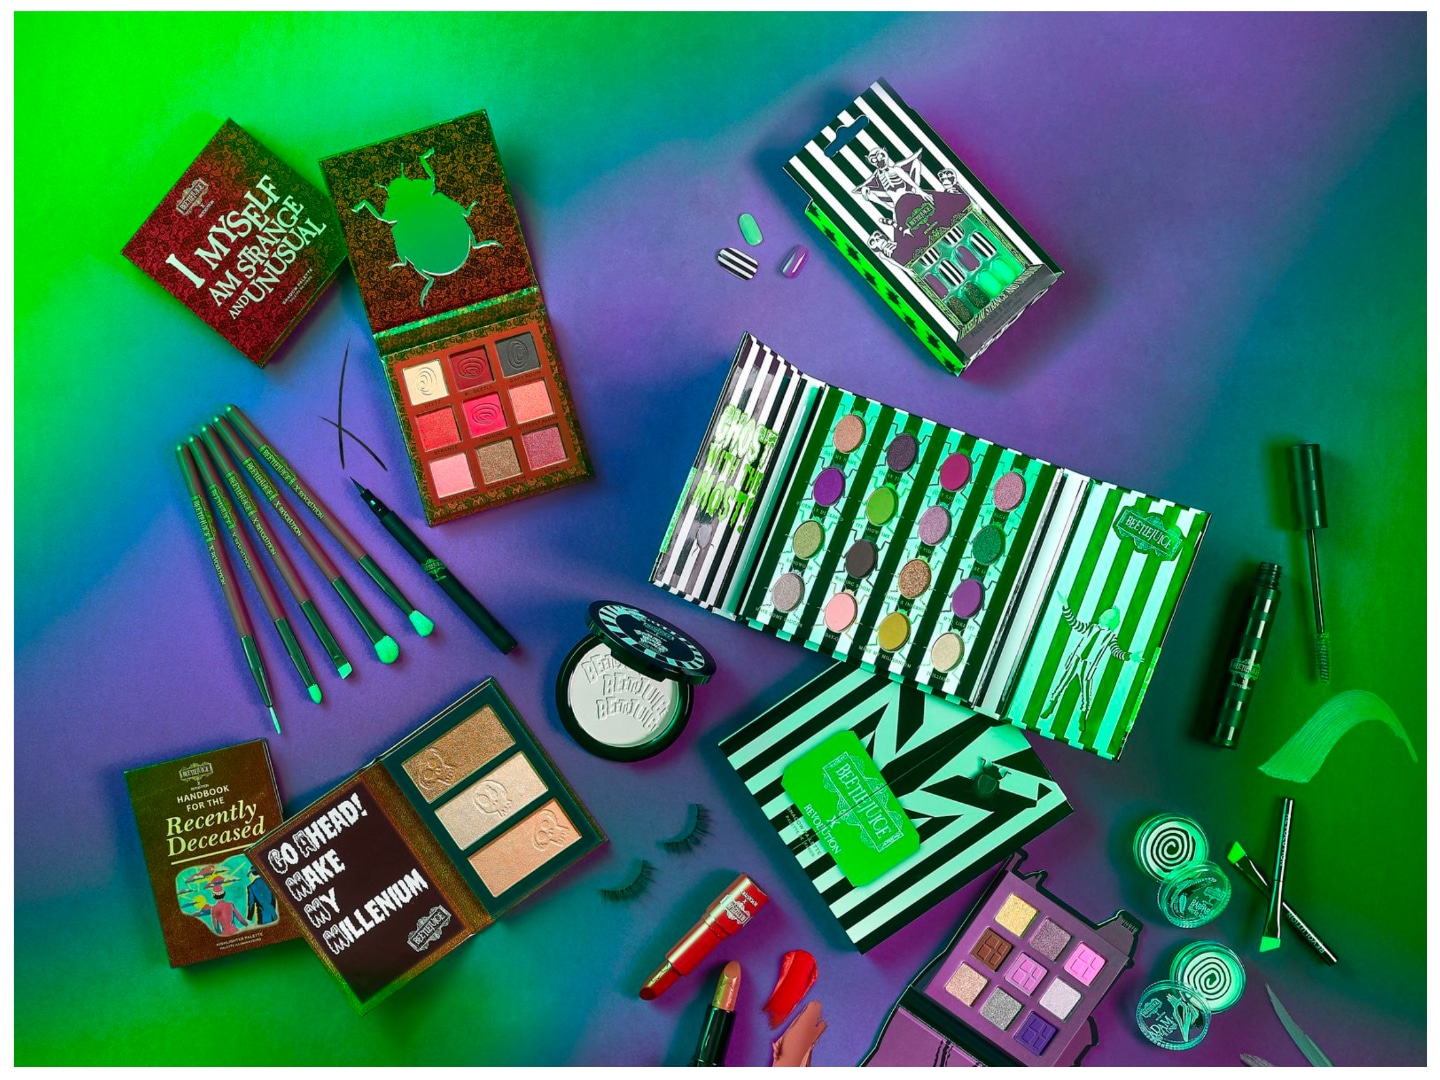 This Beetlejuice x Revolution Beauty collection is iconic